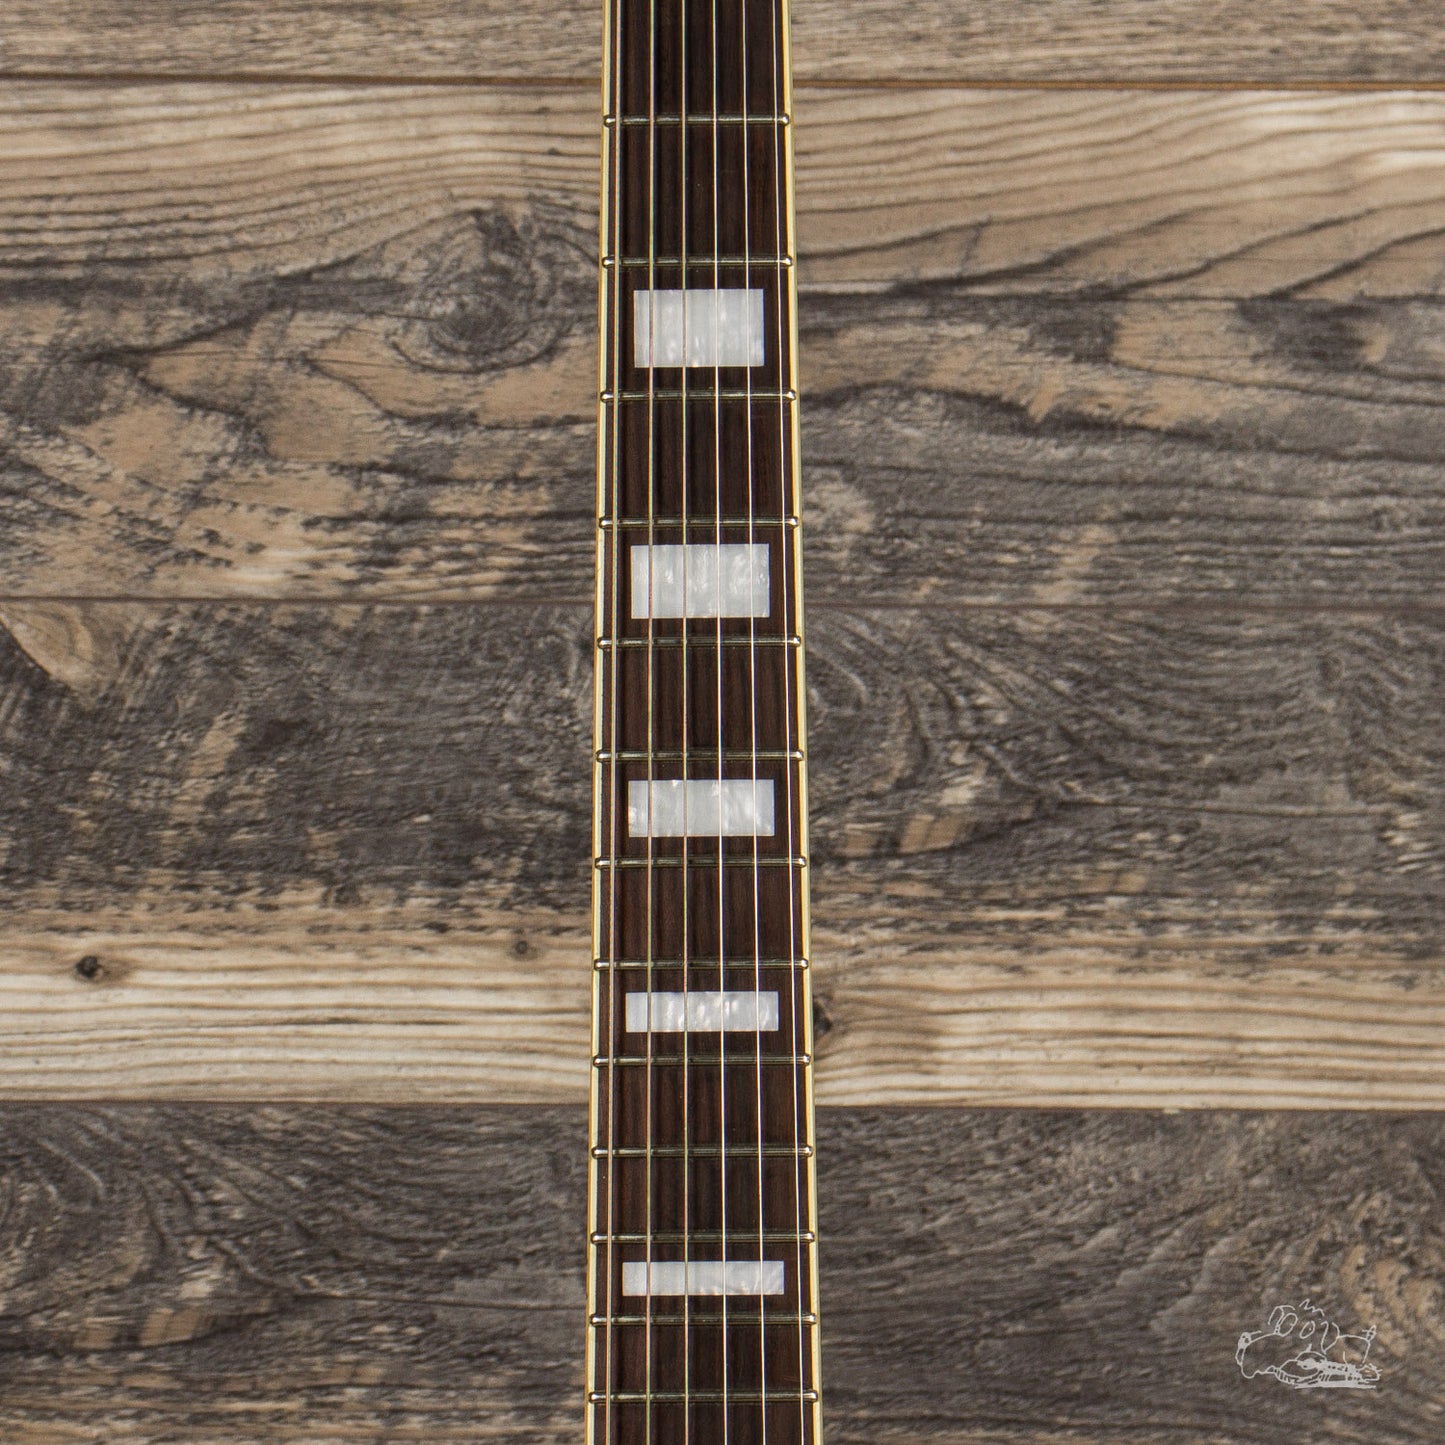 2019 Supro Silverwood in Ash Natural With Gig Bag - Make us an offer!